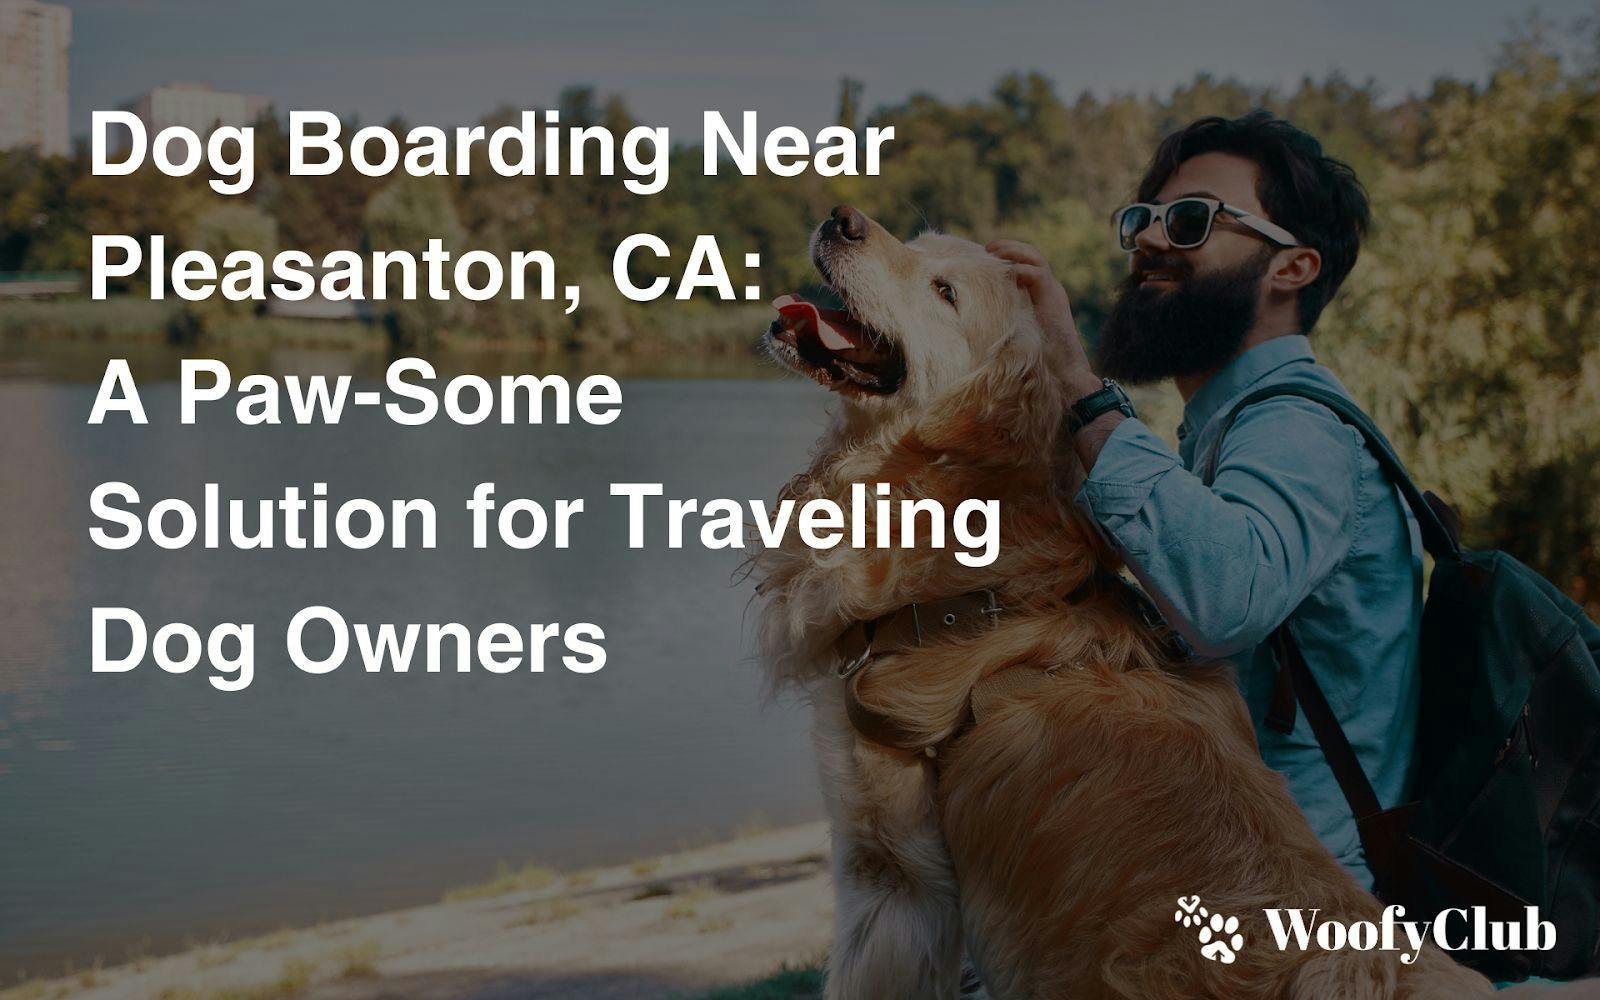 Dog Boarding Near Pleasanton, CA: A Paw-Some Solution For Traveling Dog Owners